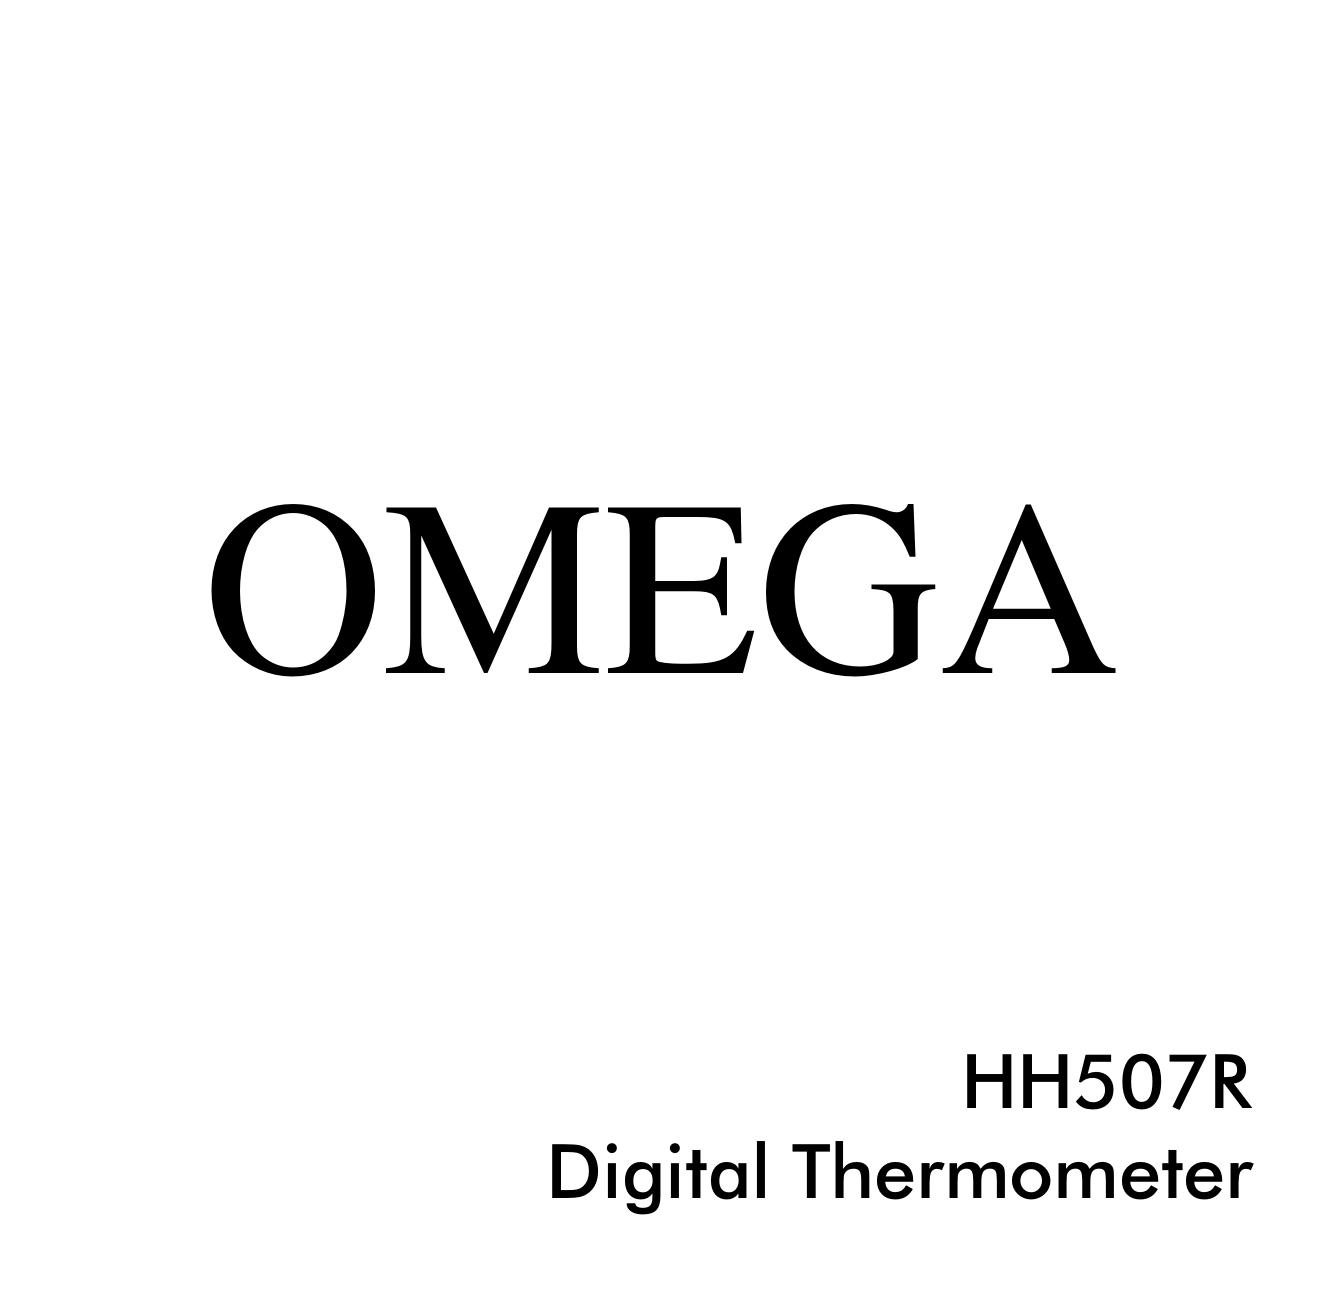 Omega Engineering HH507R Thermometer User Manual